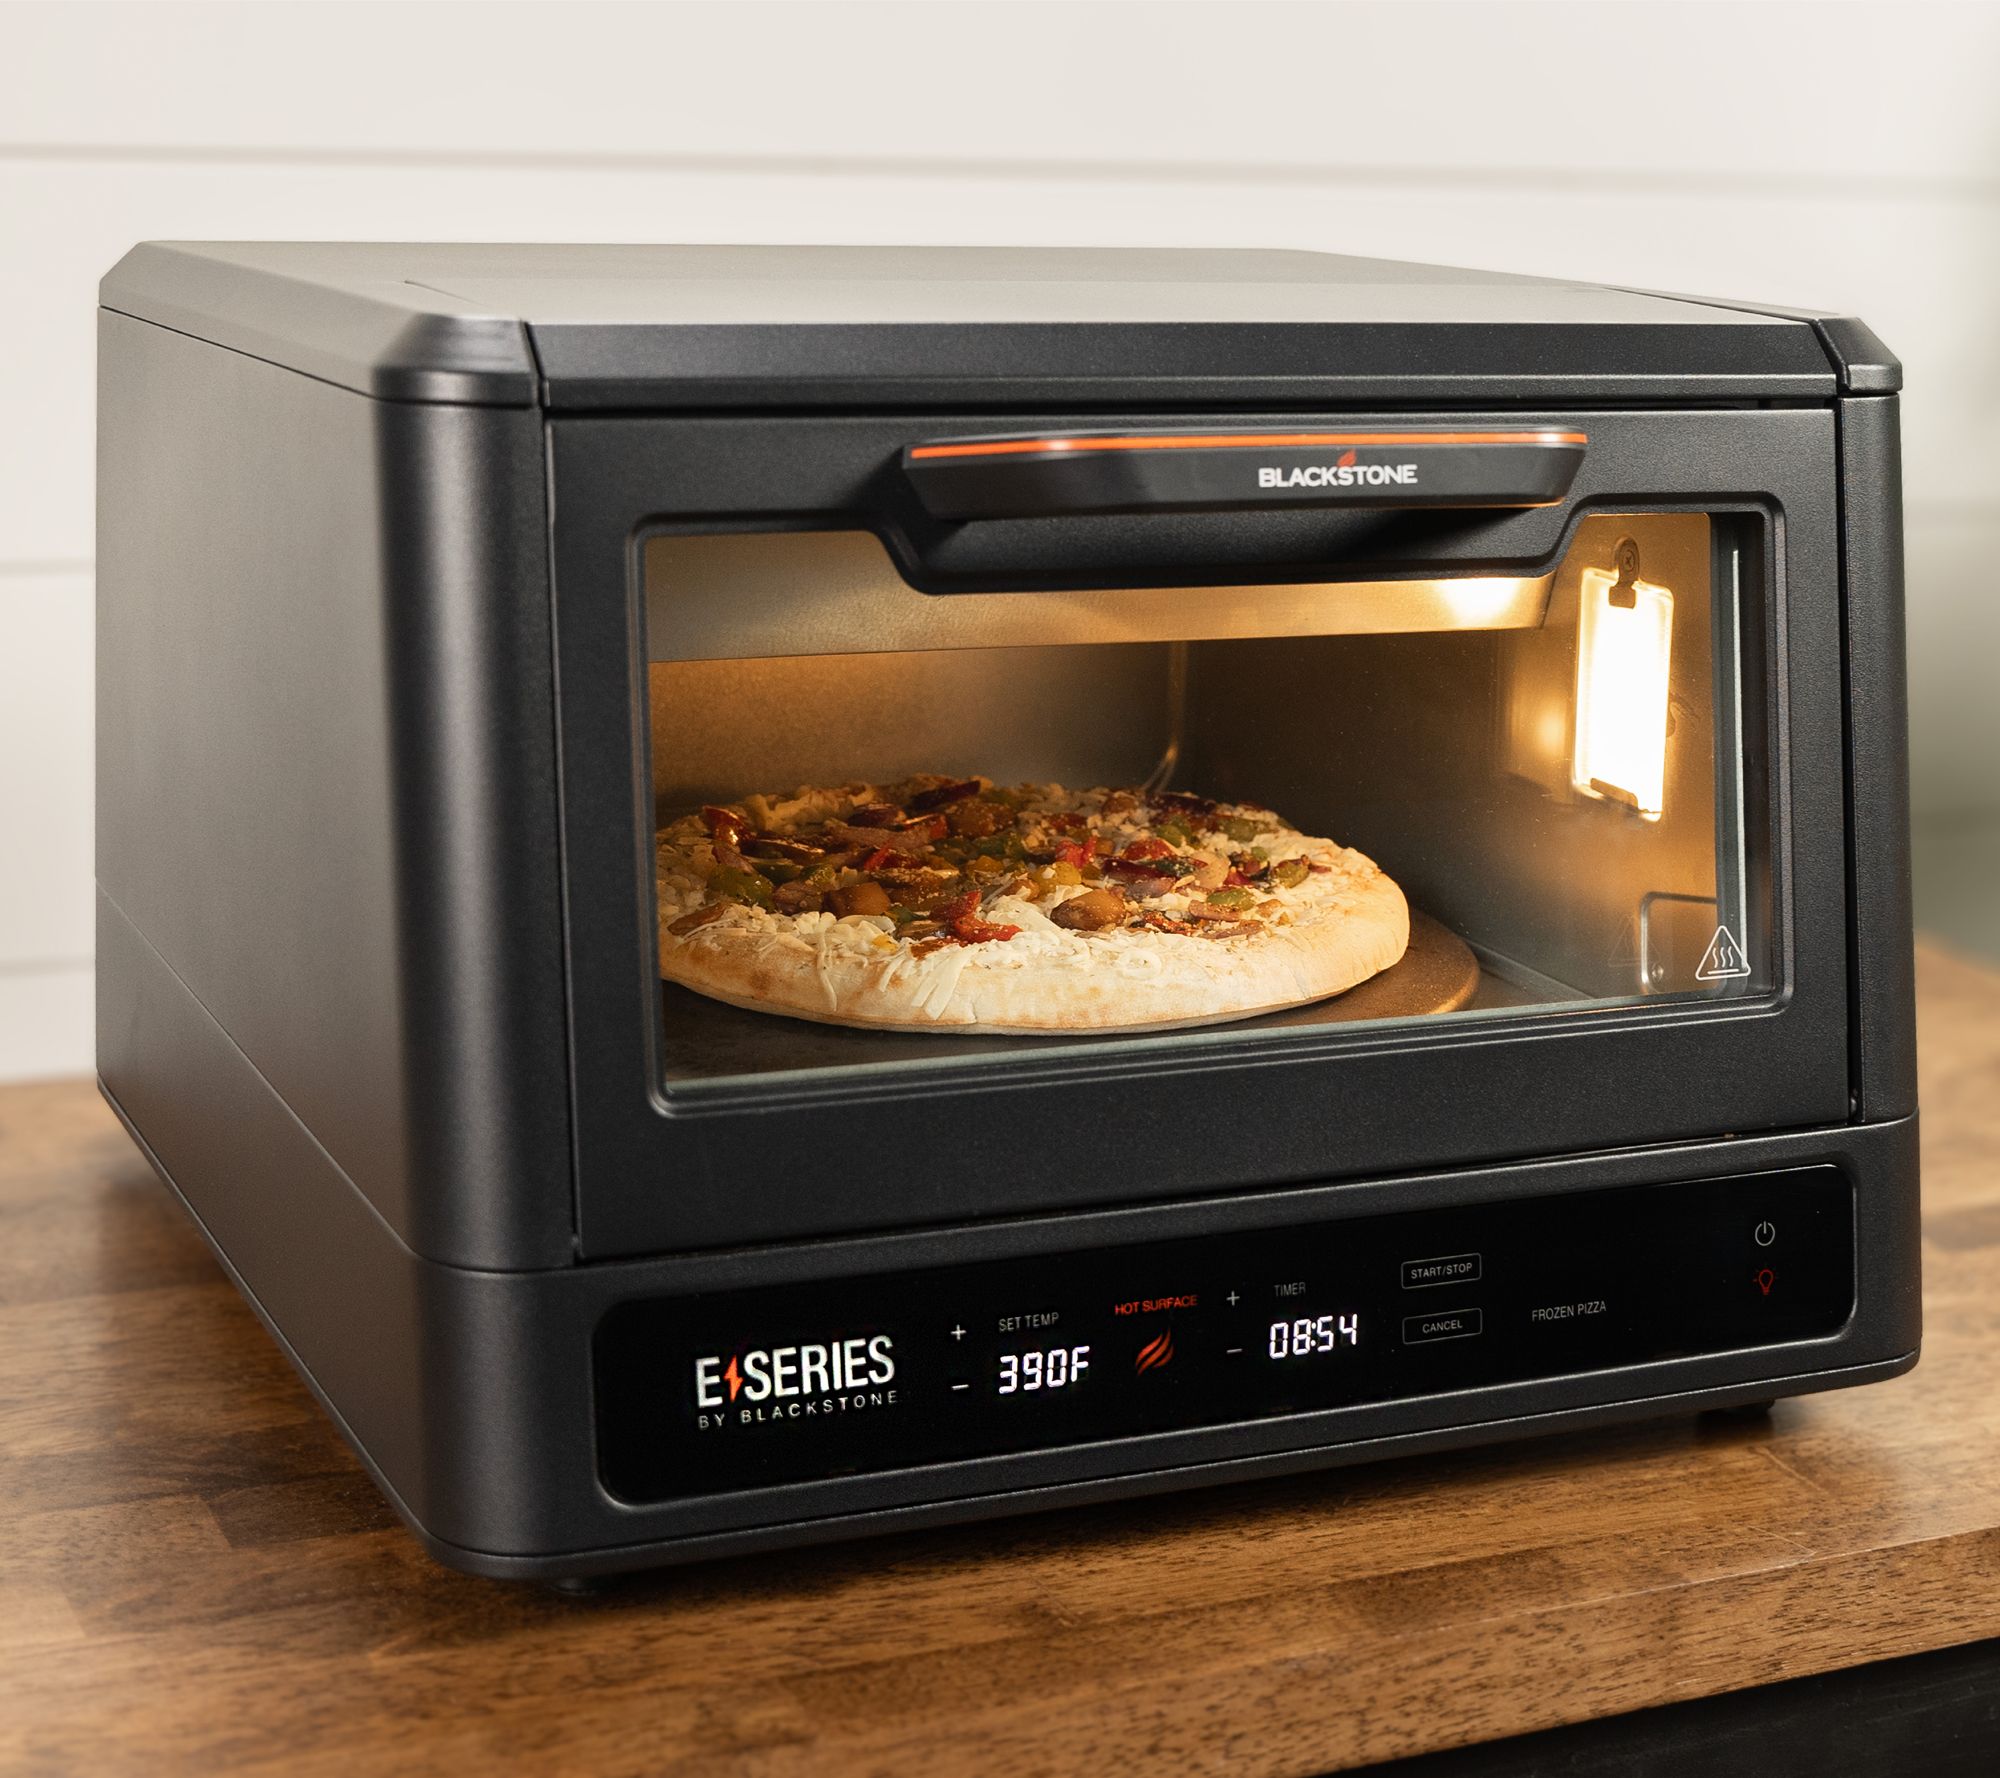 Mini Oven Baking Pizza, Electric Oven Baking Pizza